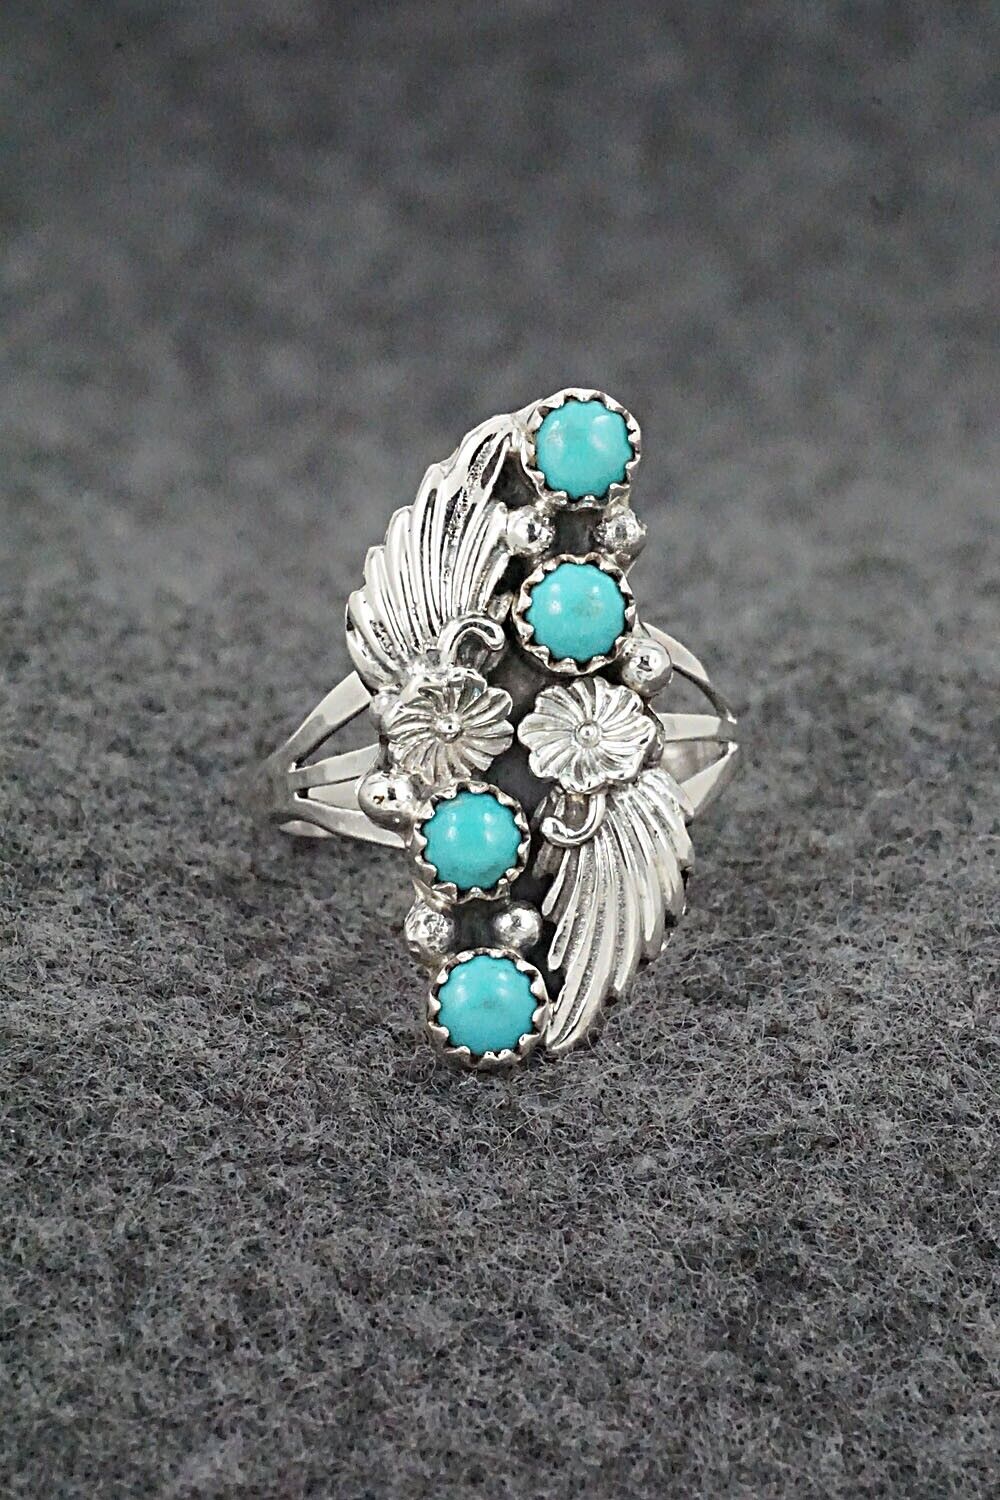 Turquoise & Sterling Silver Ring - Jerryson Henio - Size 7.75